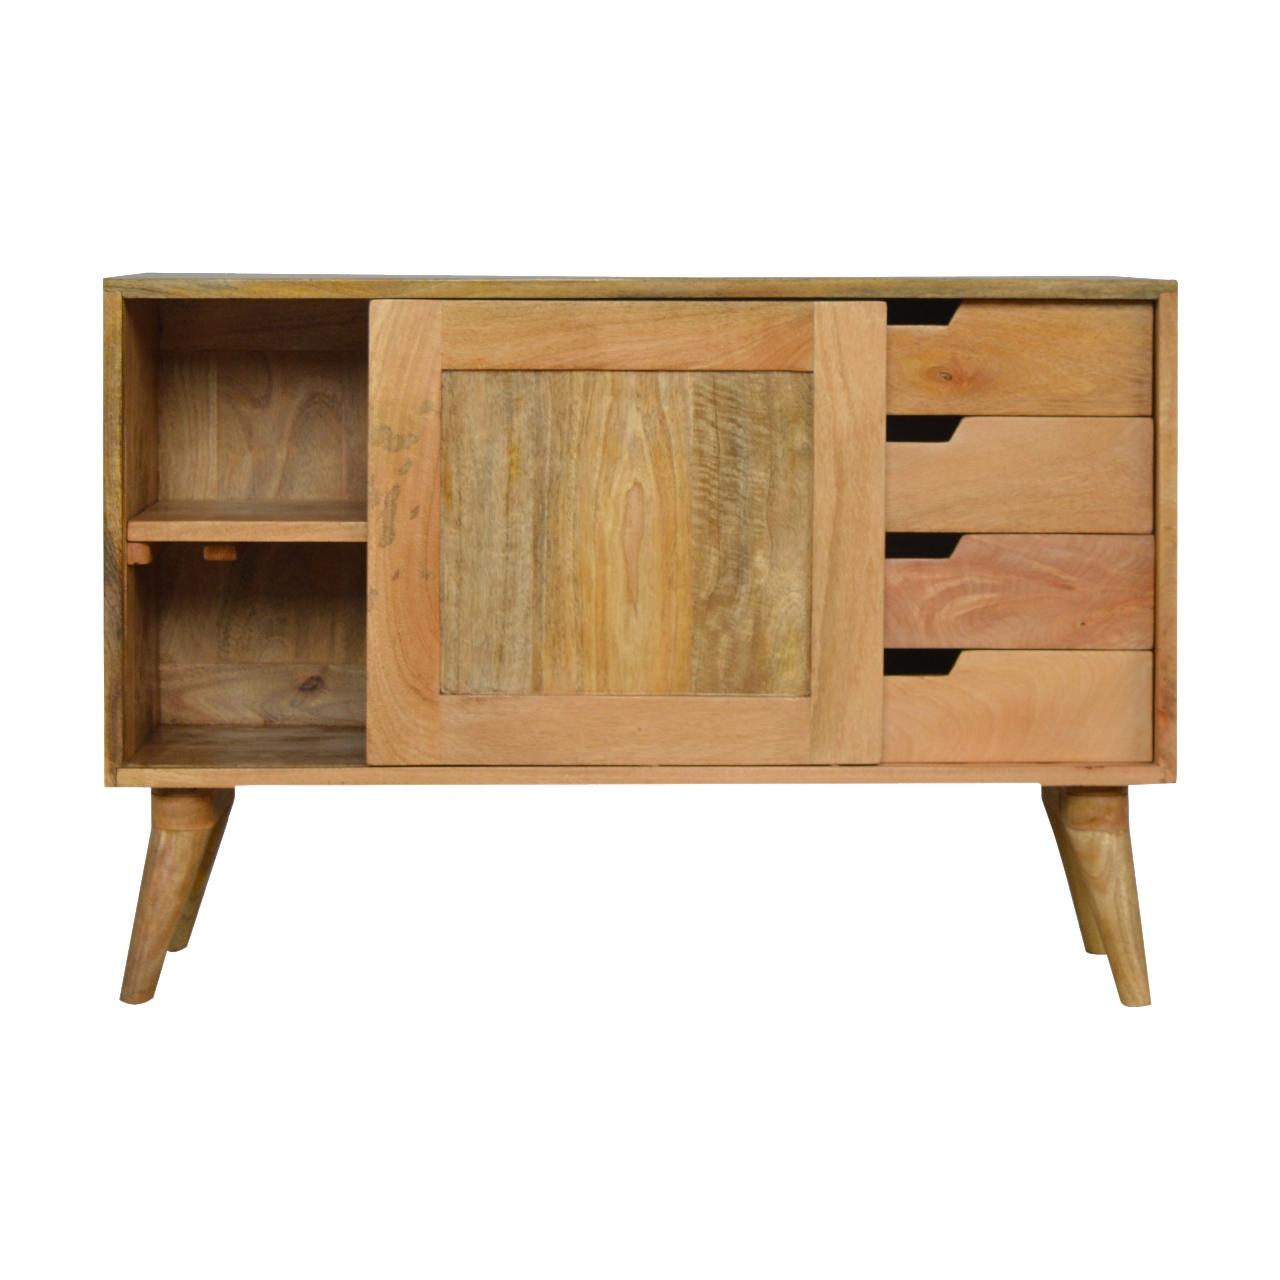 Sliding Cabinet with 4 Drawers